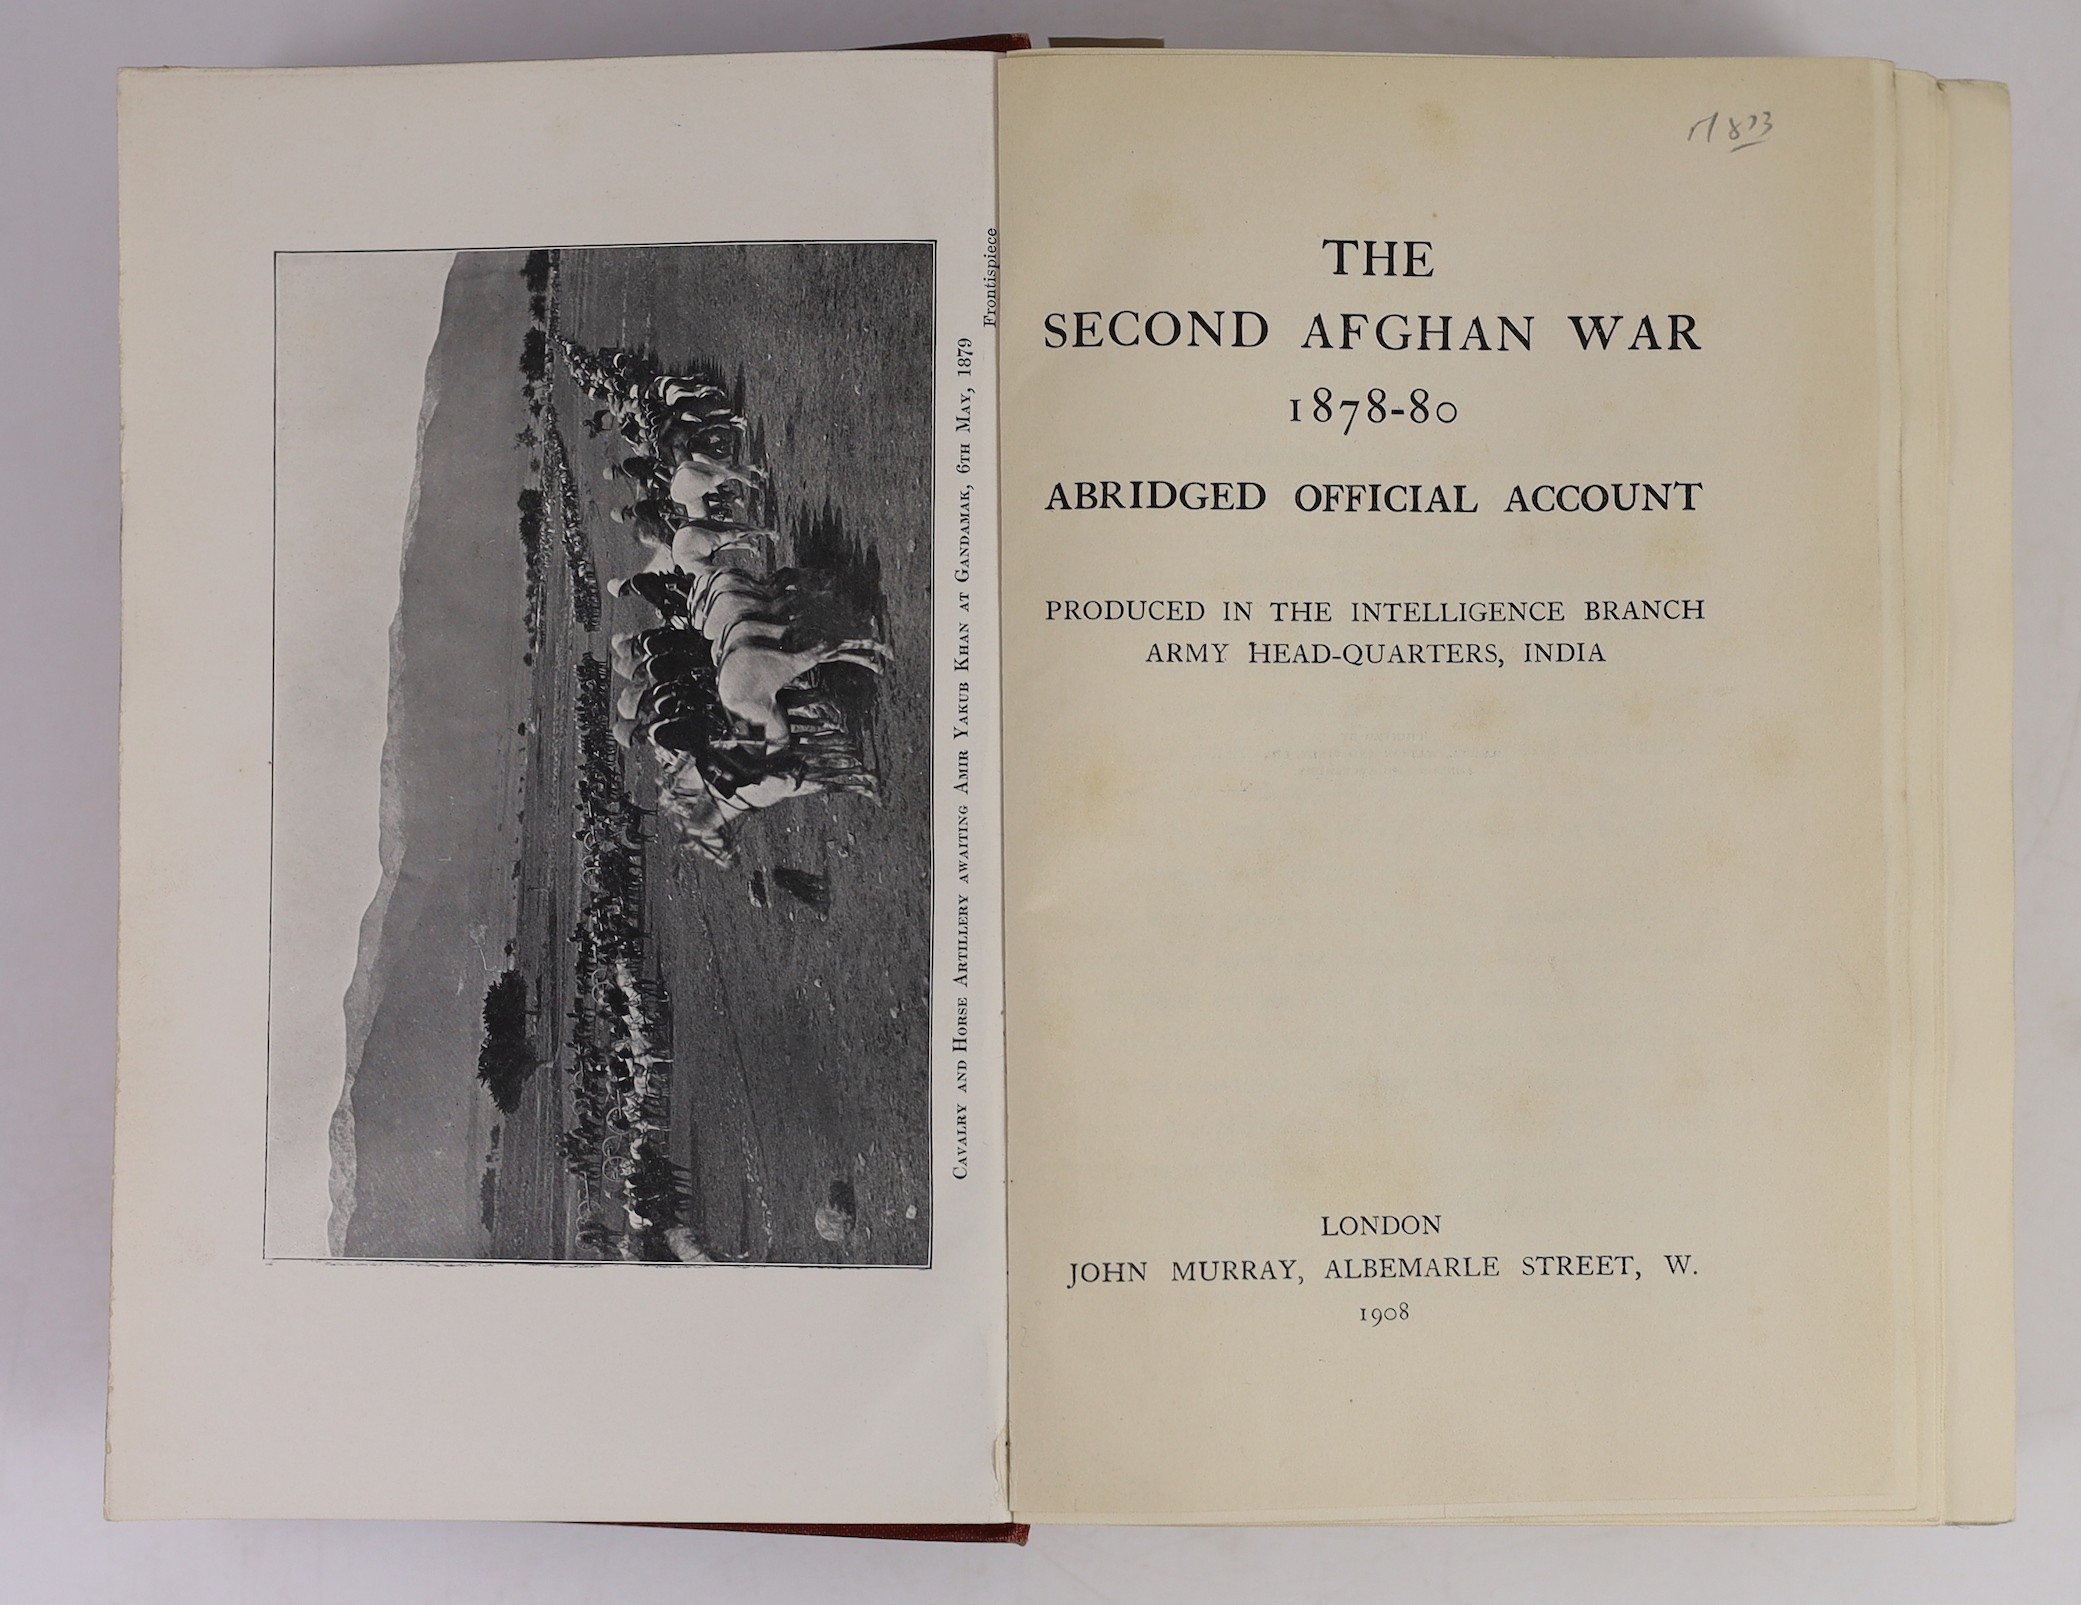 MacGregor, Charles Metcalfe, Sir and Cardew, Francis Gordon - The Second Afghan War, 1878-80, Abridged Official Account, Produced in the Intelligence Branch Army Head-Quarters, India, 1st (and only) edition, 8vo, origina